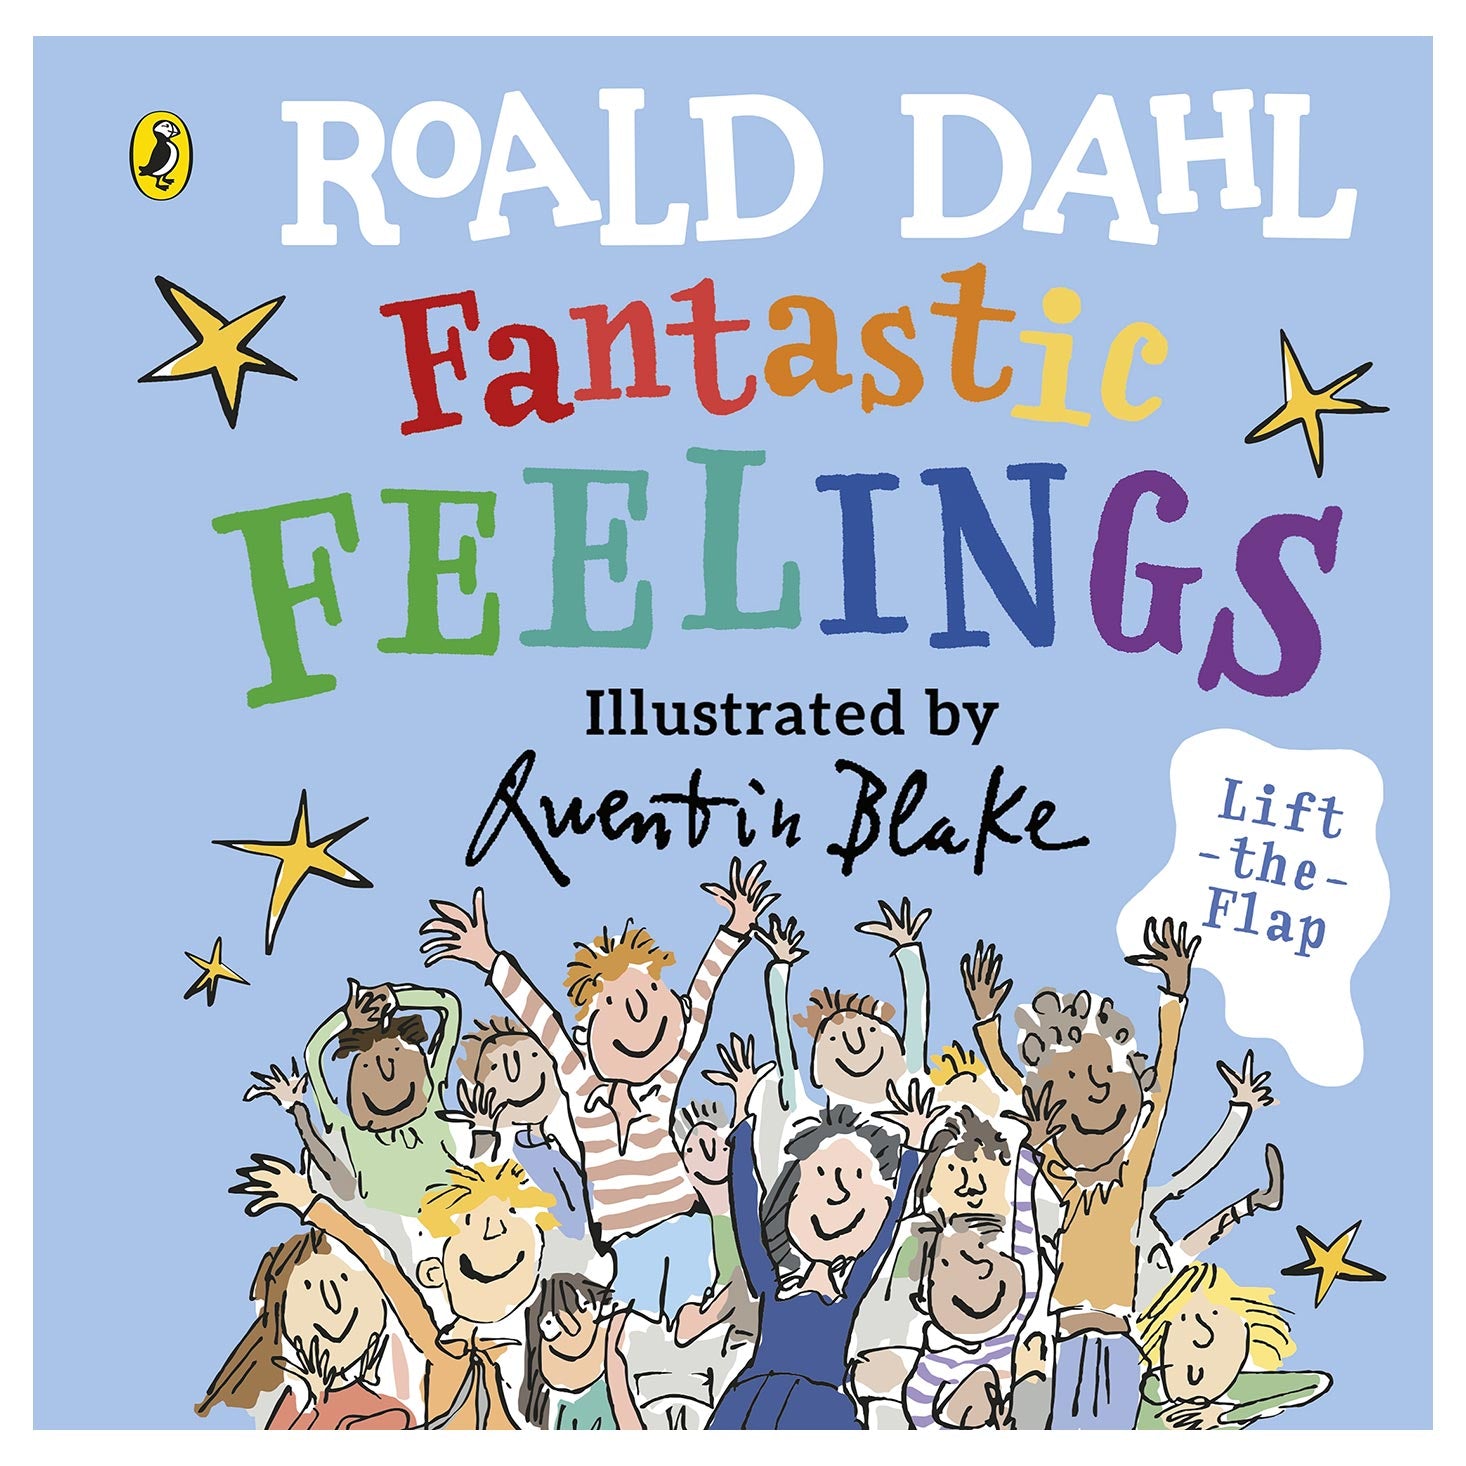 Fantastic Feelings, a board book from Roald Dahl and Quentin Blake